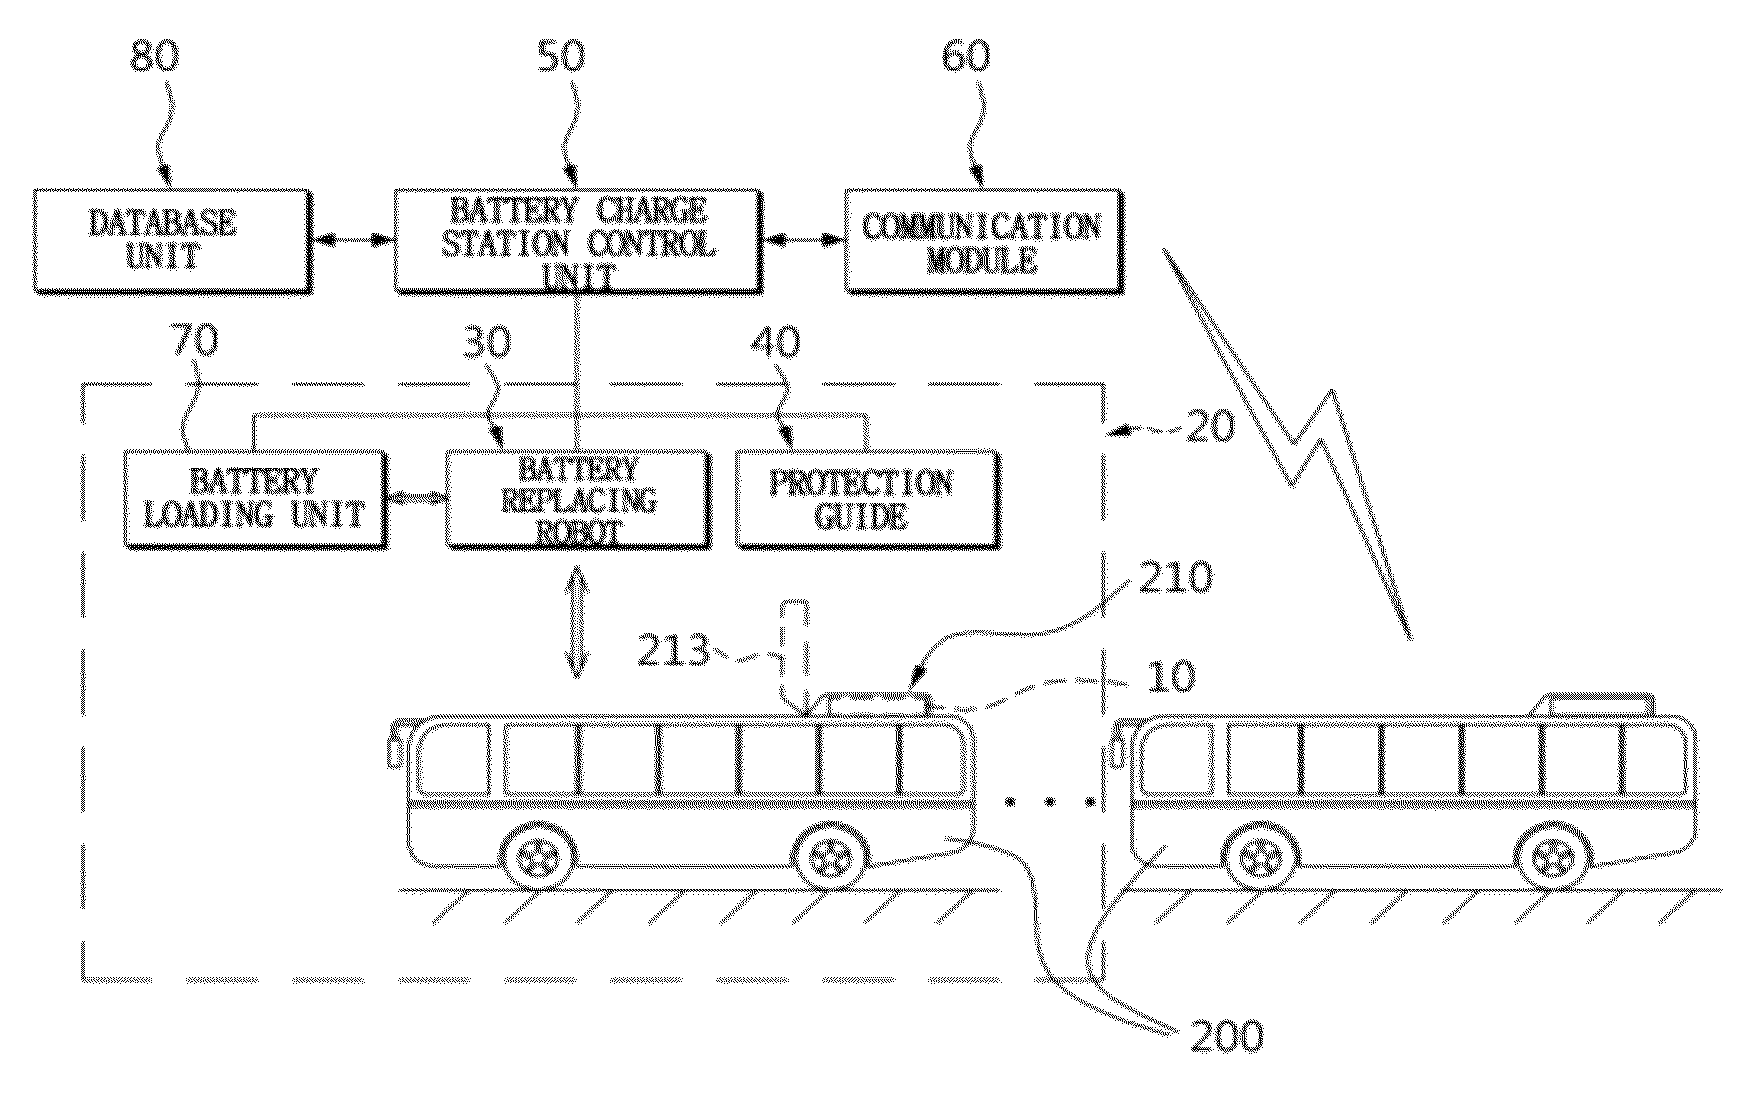 Battery exchanging method for electric vehicle